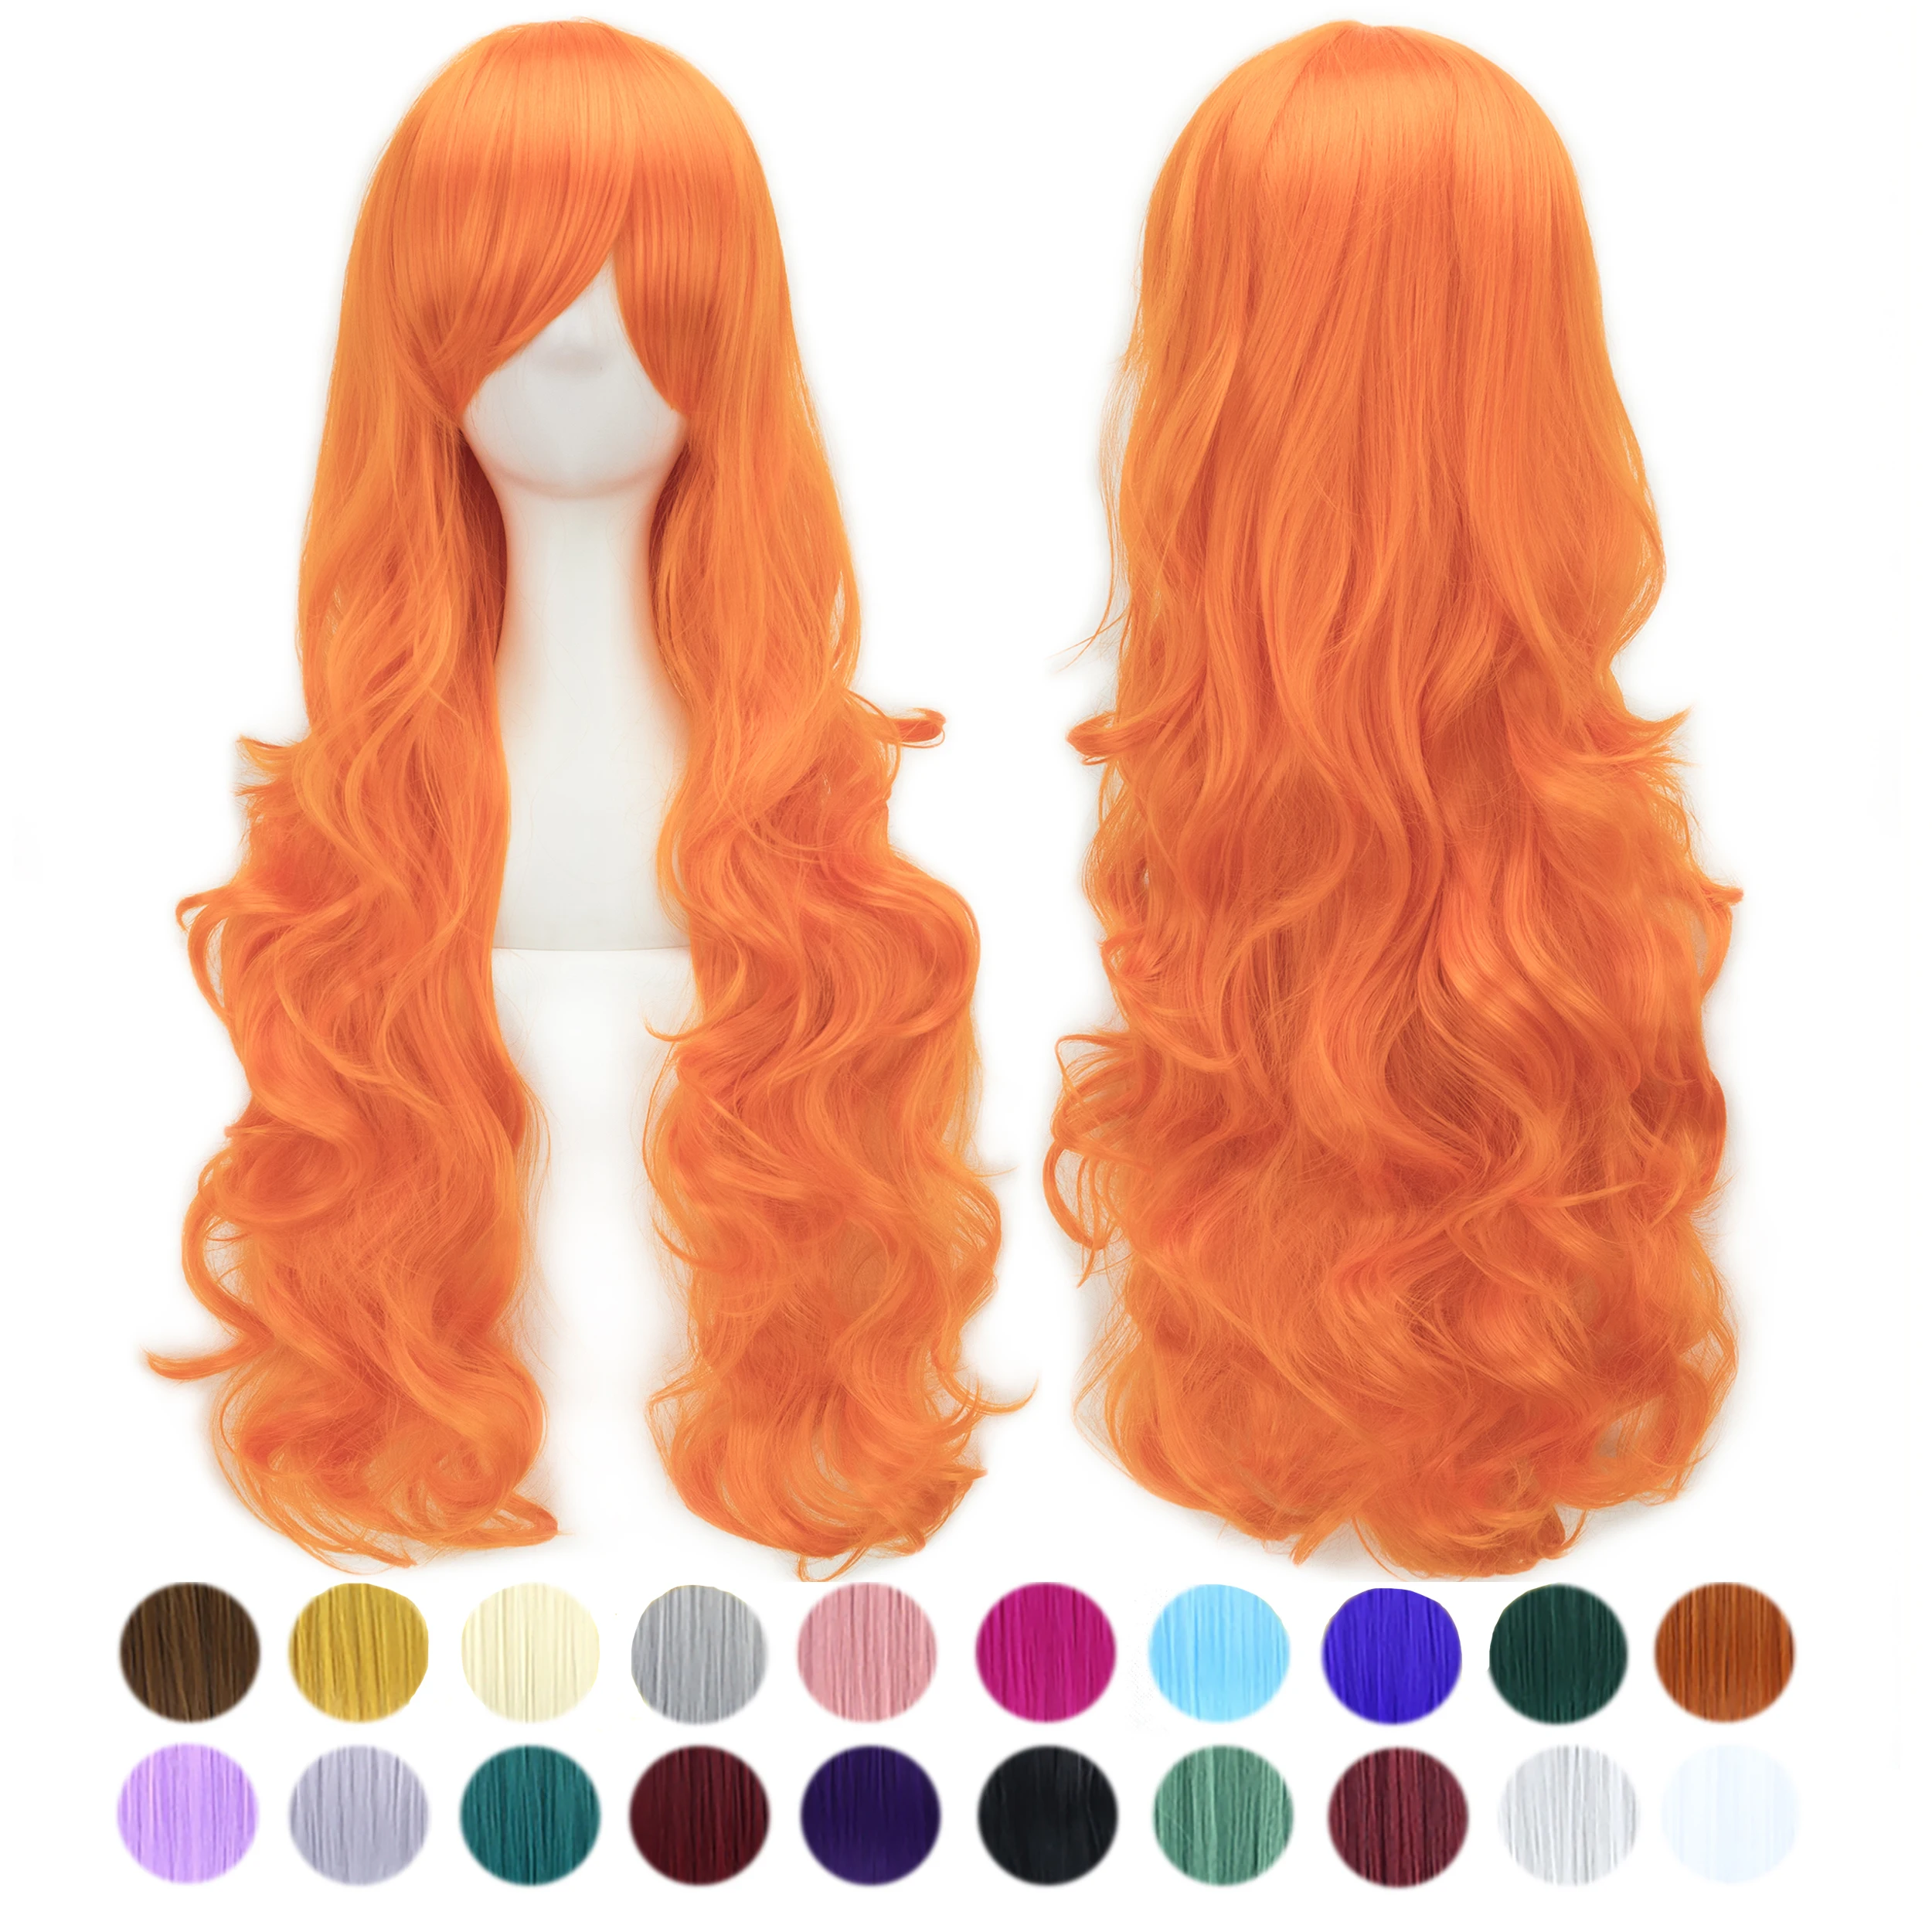 

Soowee 80cm Long Orange Curly Natural Hair Cosplay Wig with Bangs Colorful Halloween Costume Party Wigs for Women